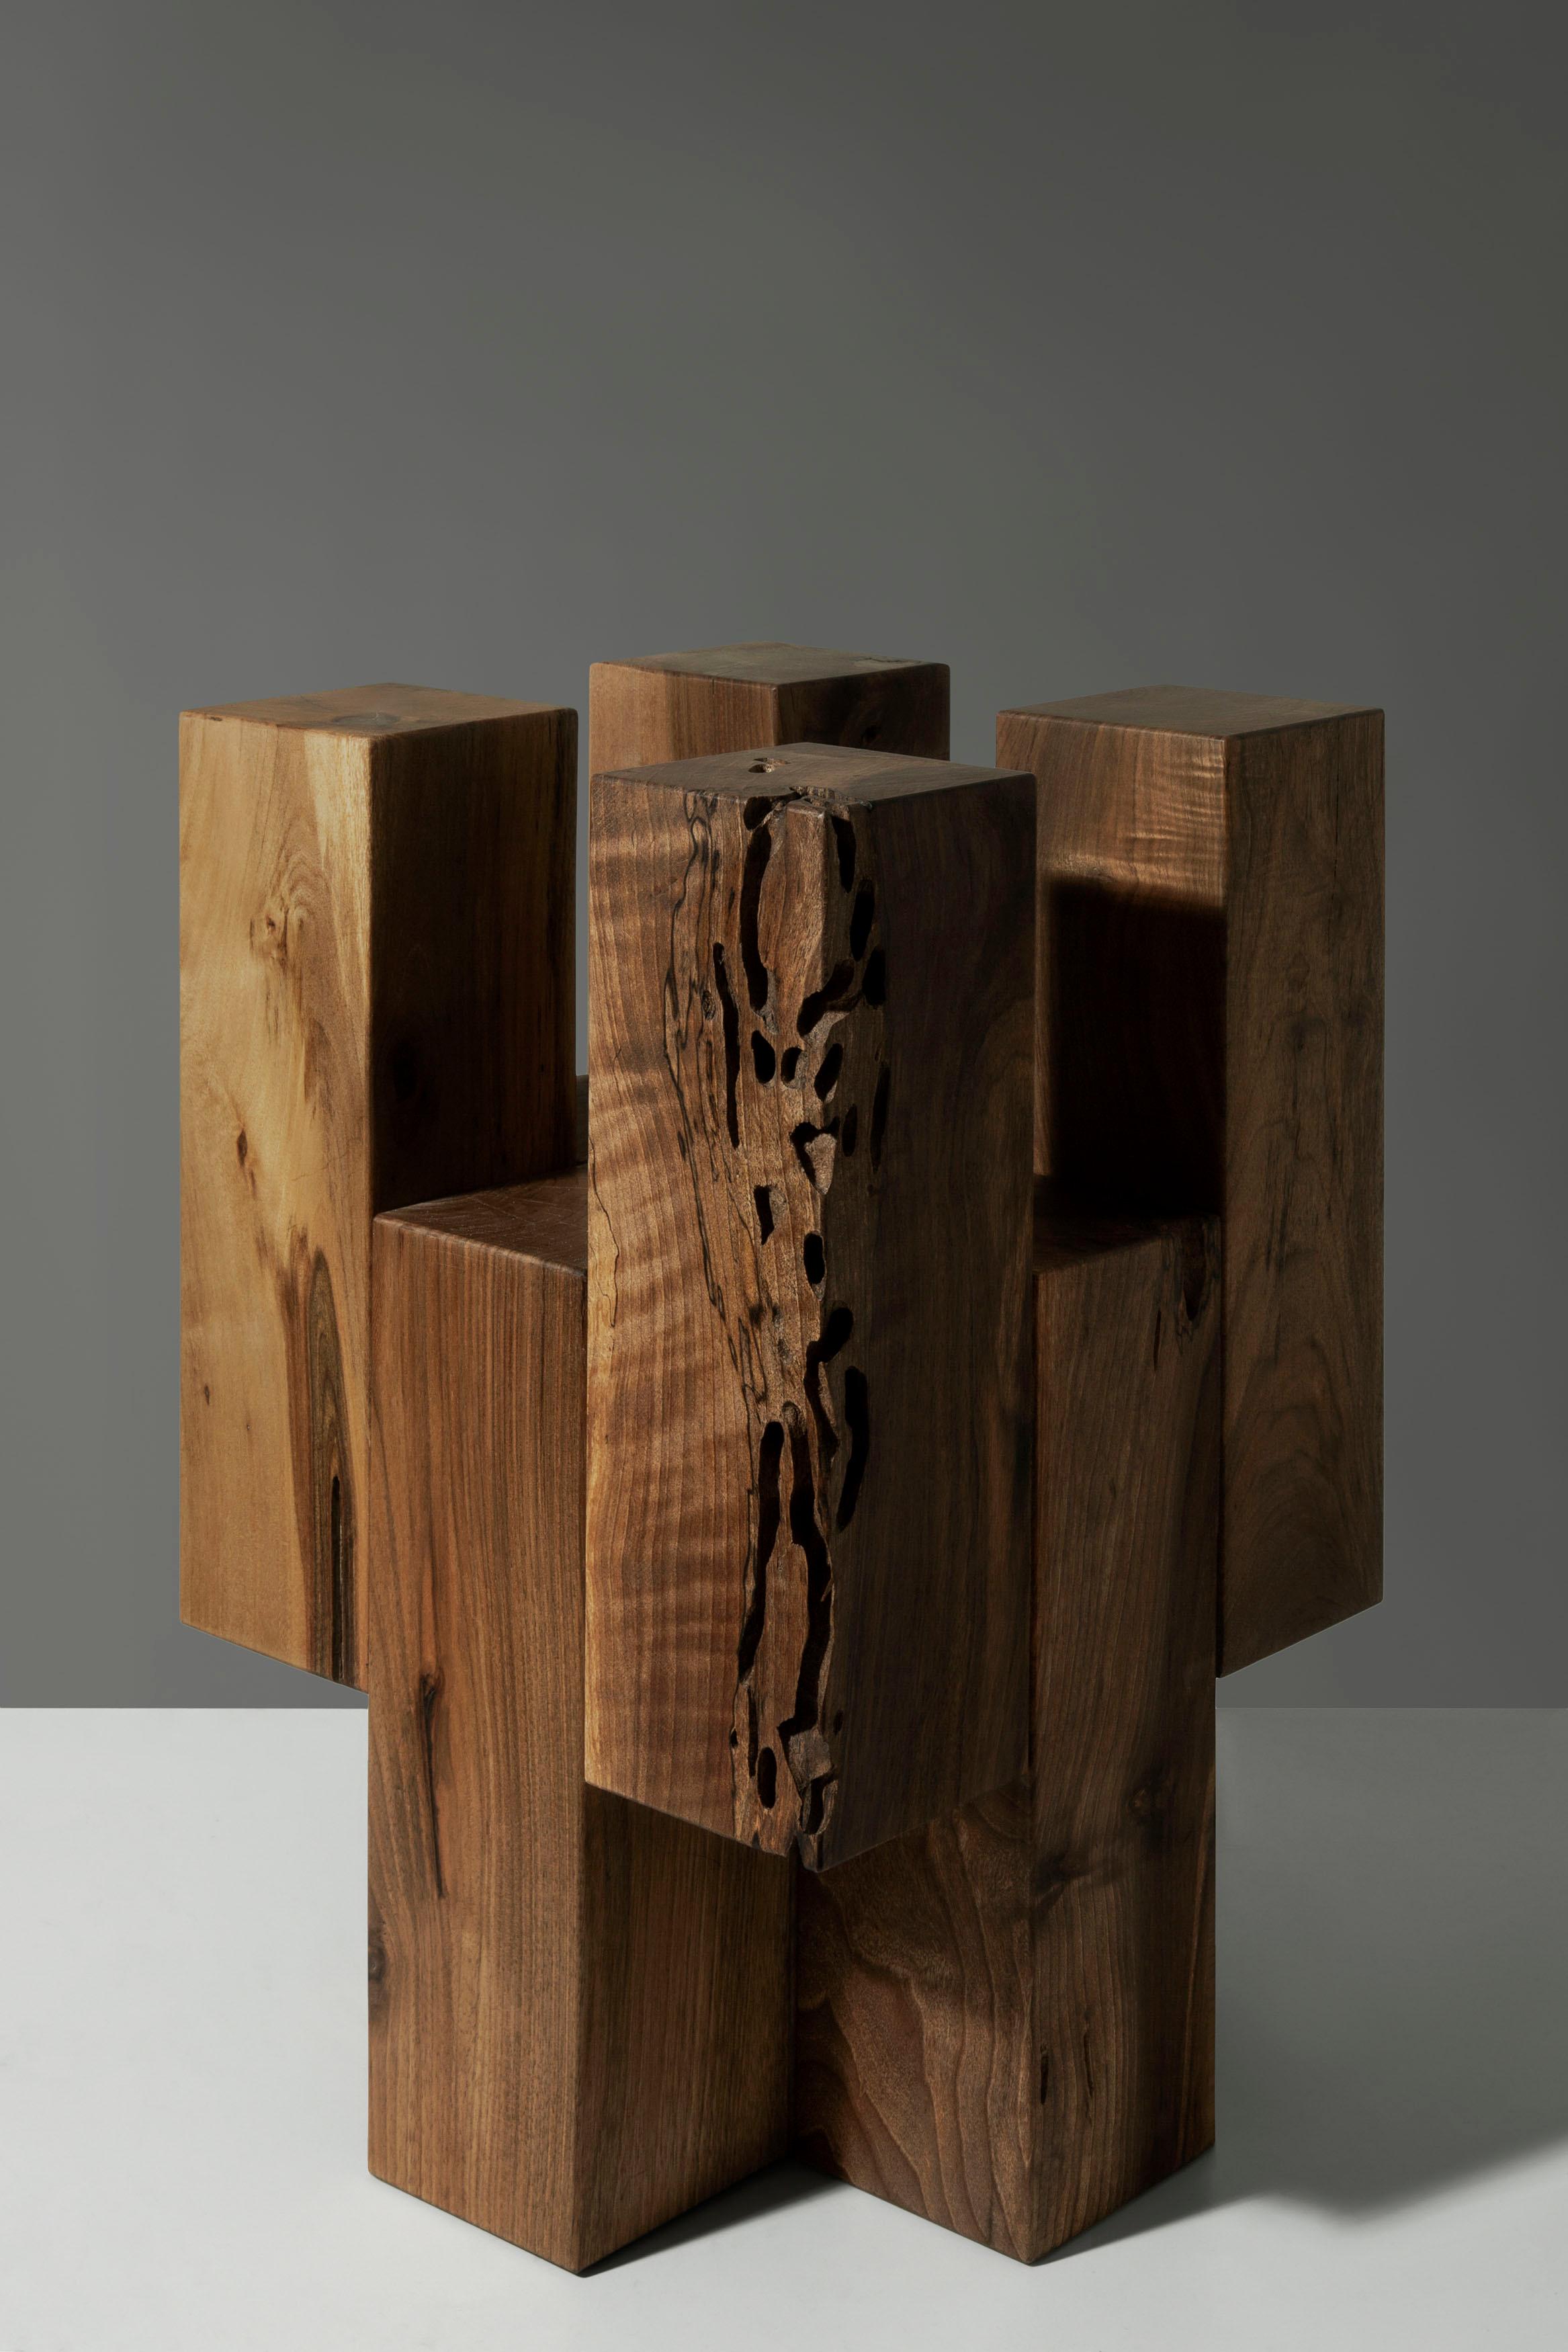 Brick Side Table by Nana Zaalishvili
Dimensions: D 30 x W 30 x H 45 cm.
Materials: Solid walnut.

‘Brick’ is the first attempt by Idaaf Architects workshop to create a new building material. White the process of selecting its textures is at the